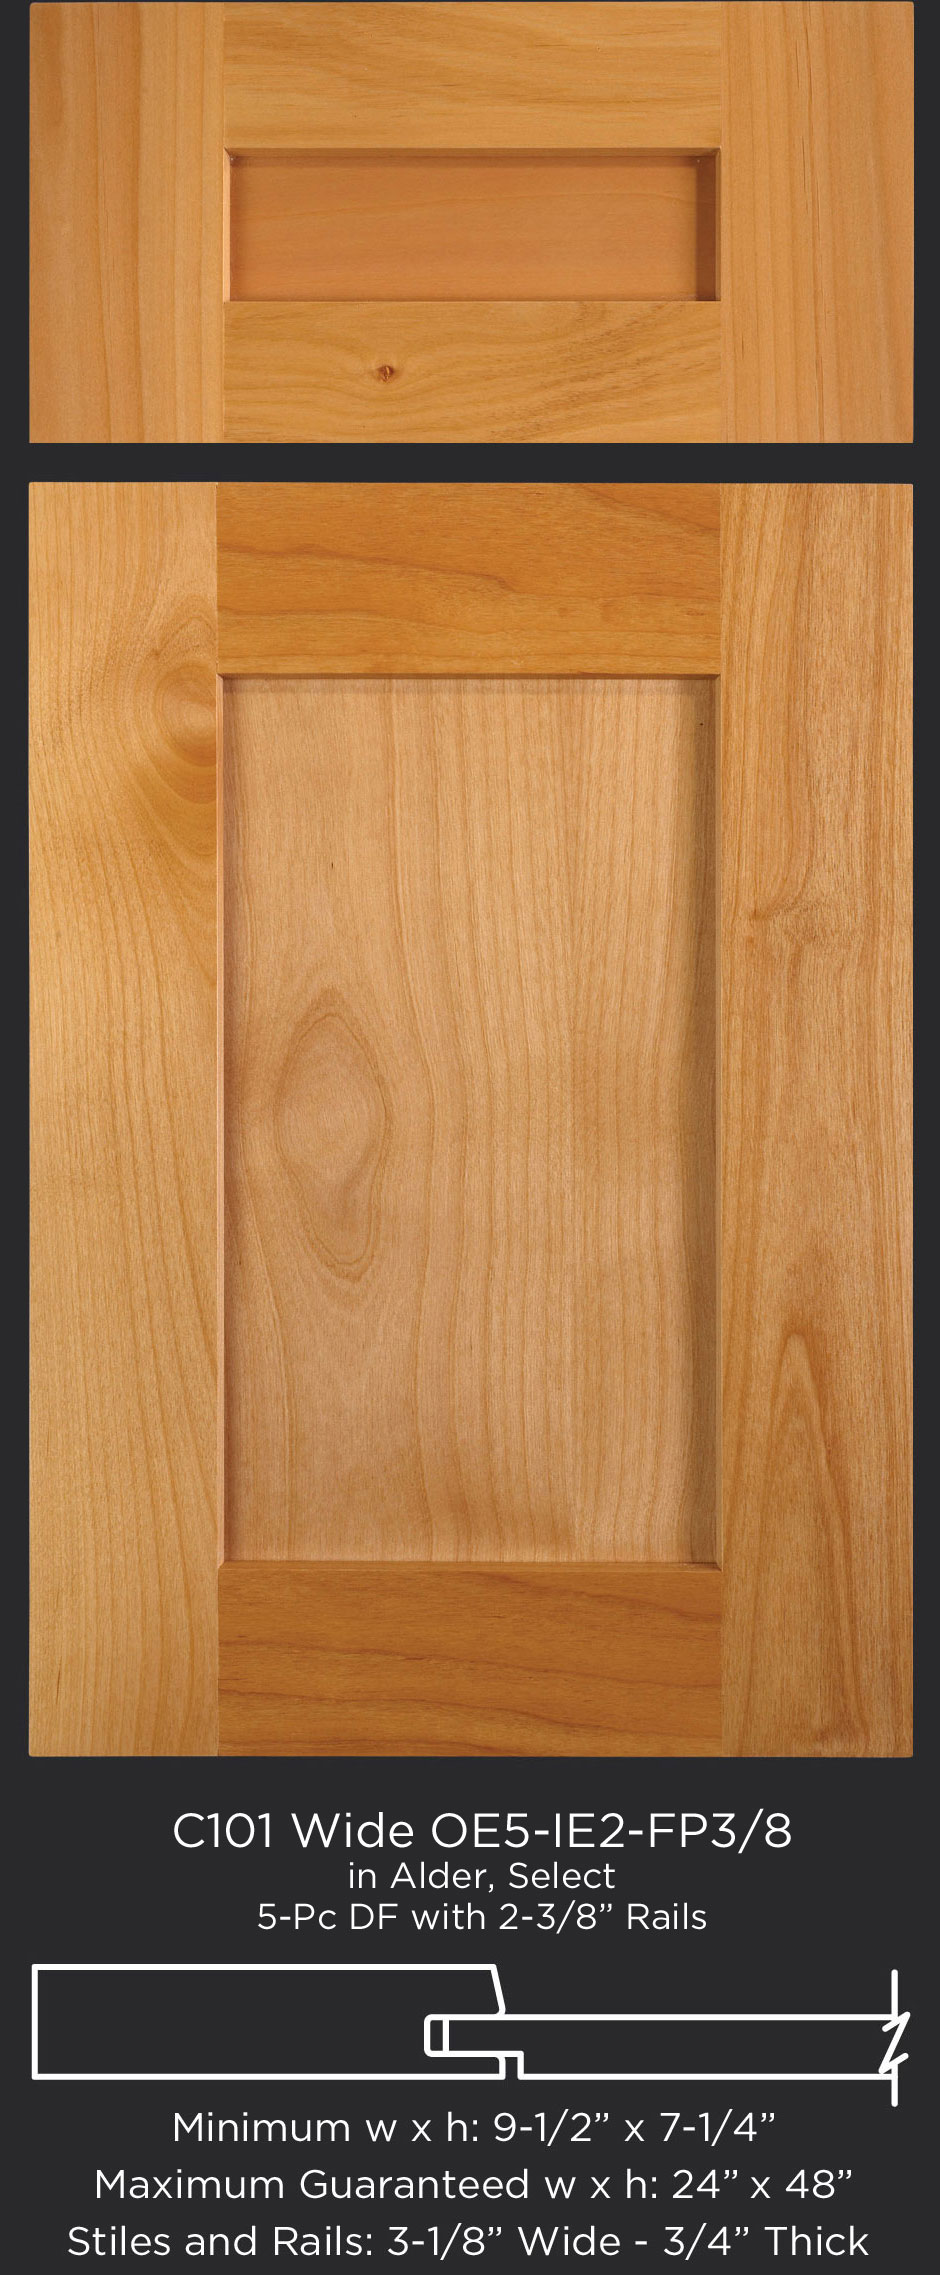 Cope and Stick Cabinet Door C101 Wide OE5-IE5-FP3/8 Alder, Select and 5-piece drawer front